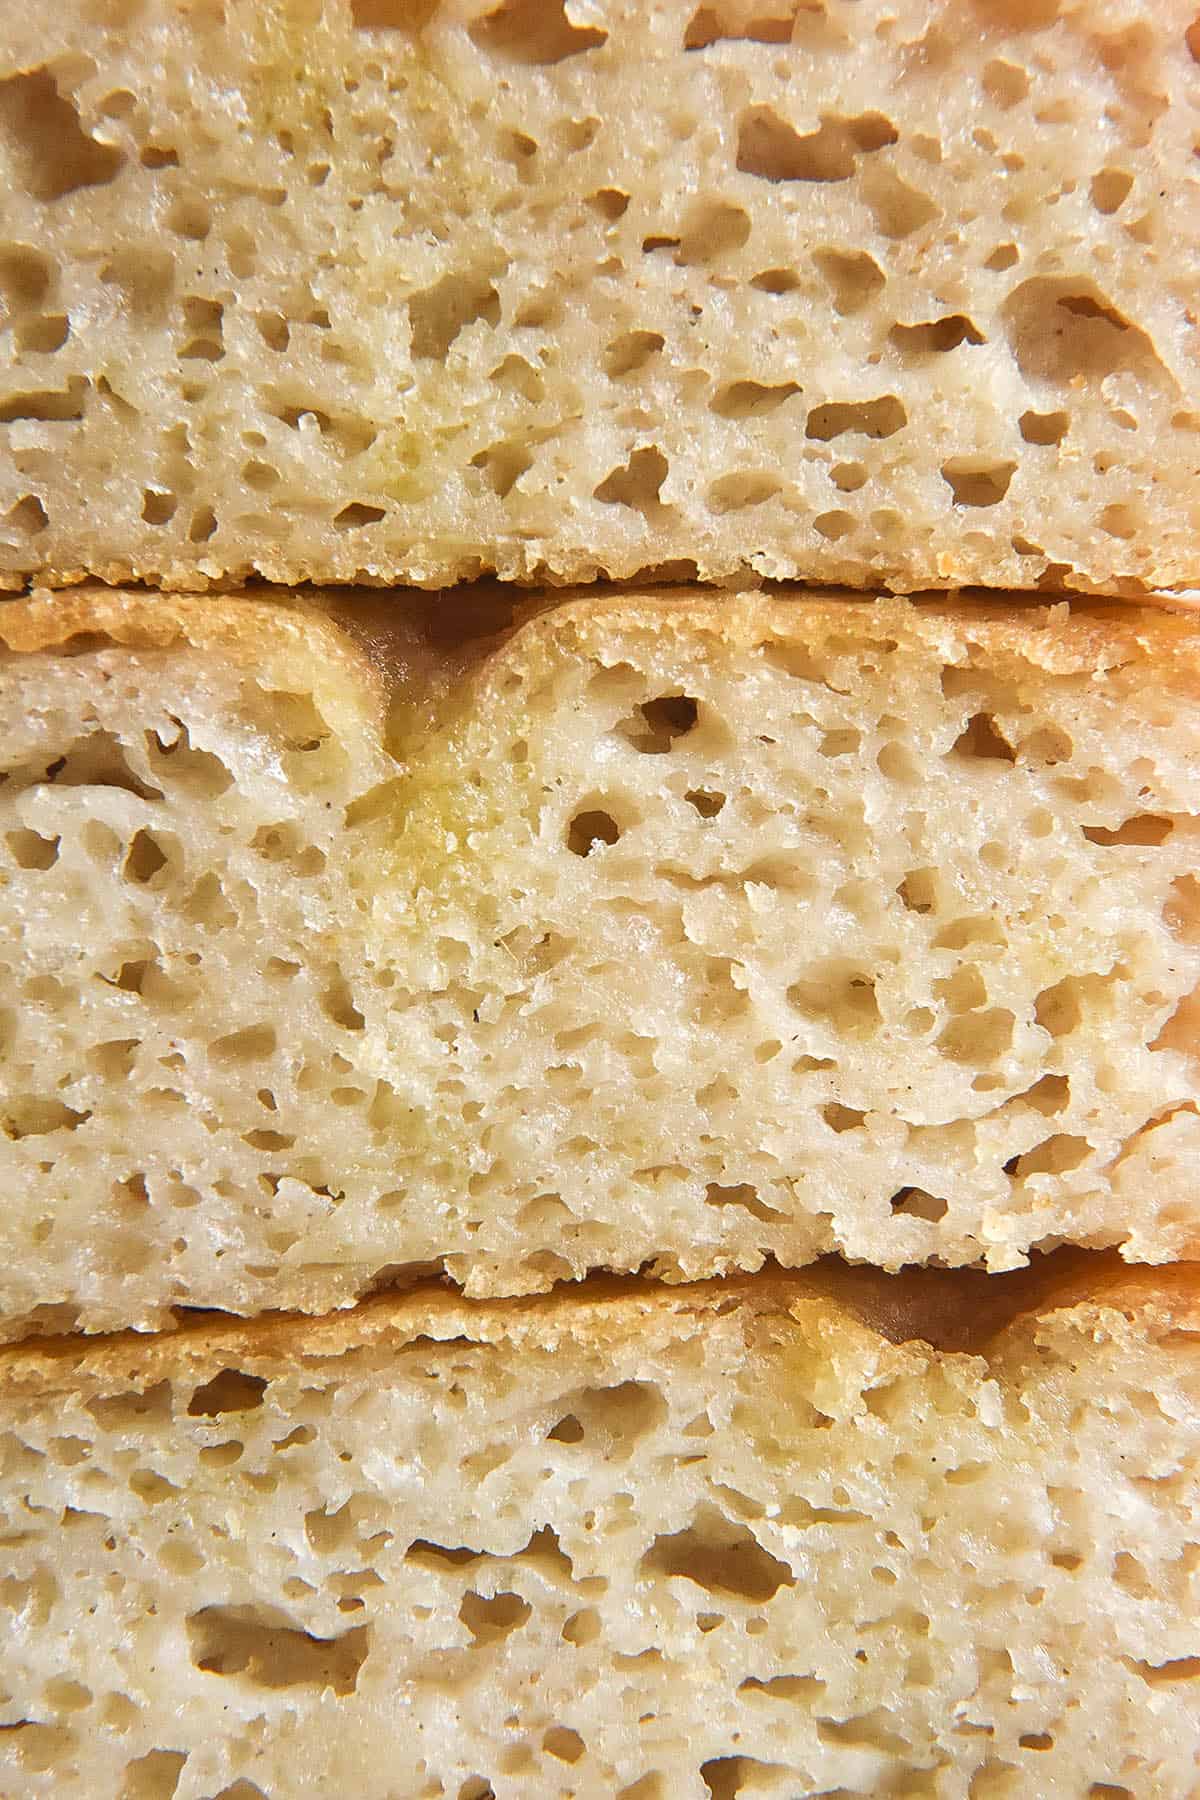 A side on close up macro image of a stack of gluten free focaccia slices. The focaccia crumb is exposed, revealing a wide open crumb and olive oil oozing throughout the focaccia